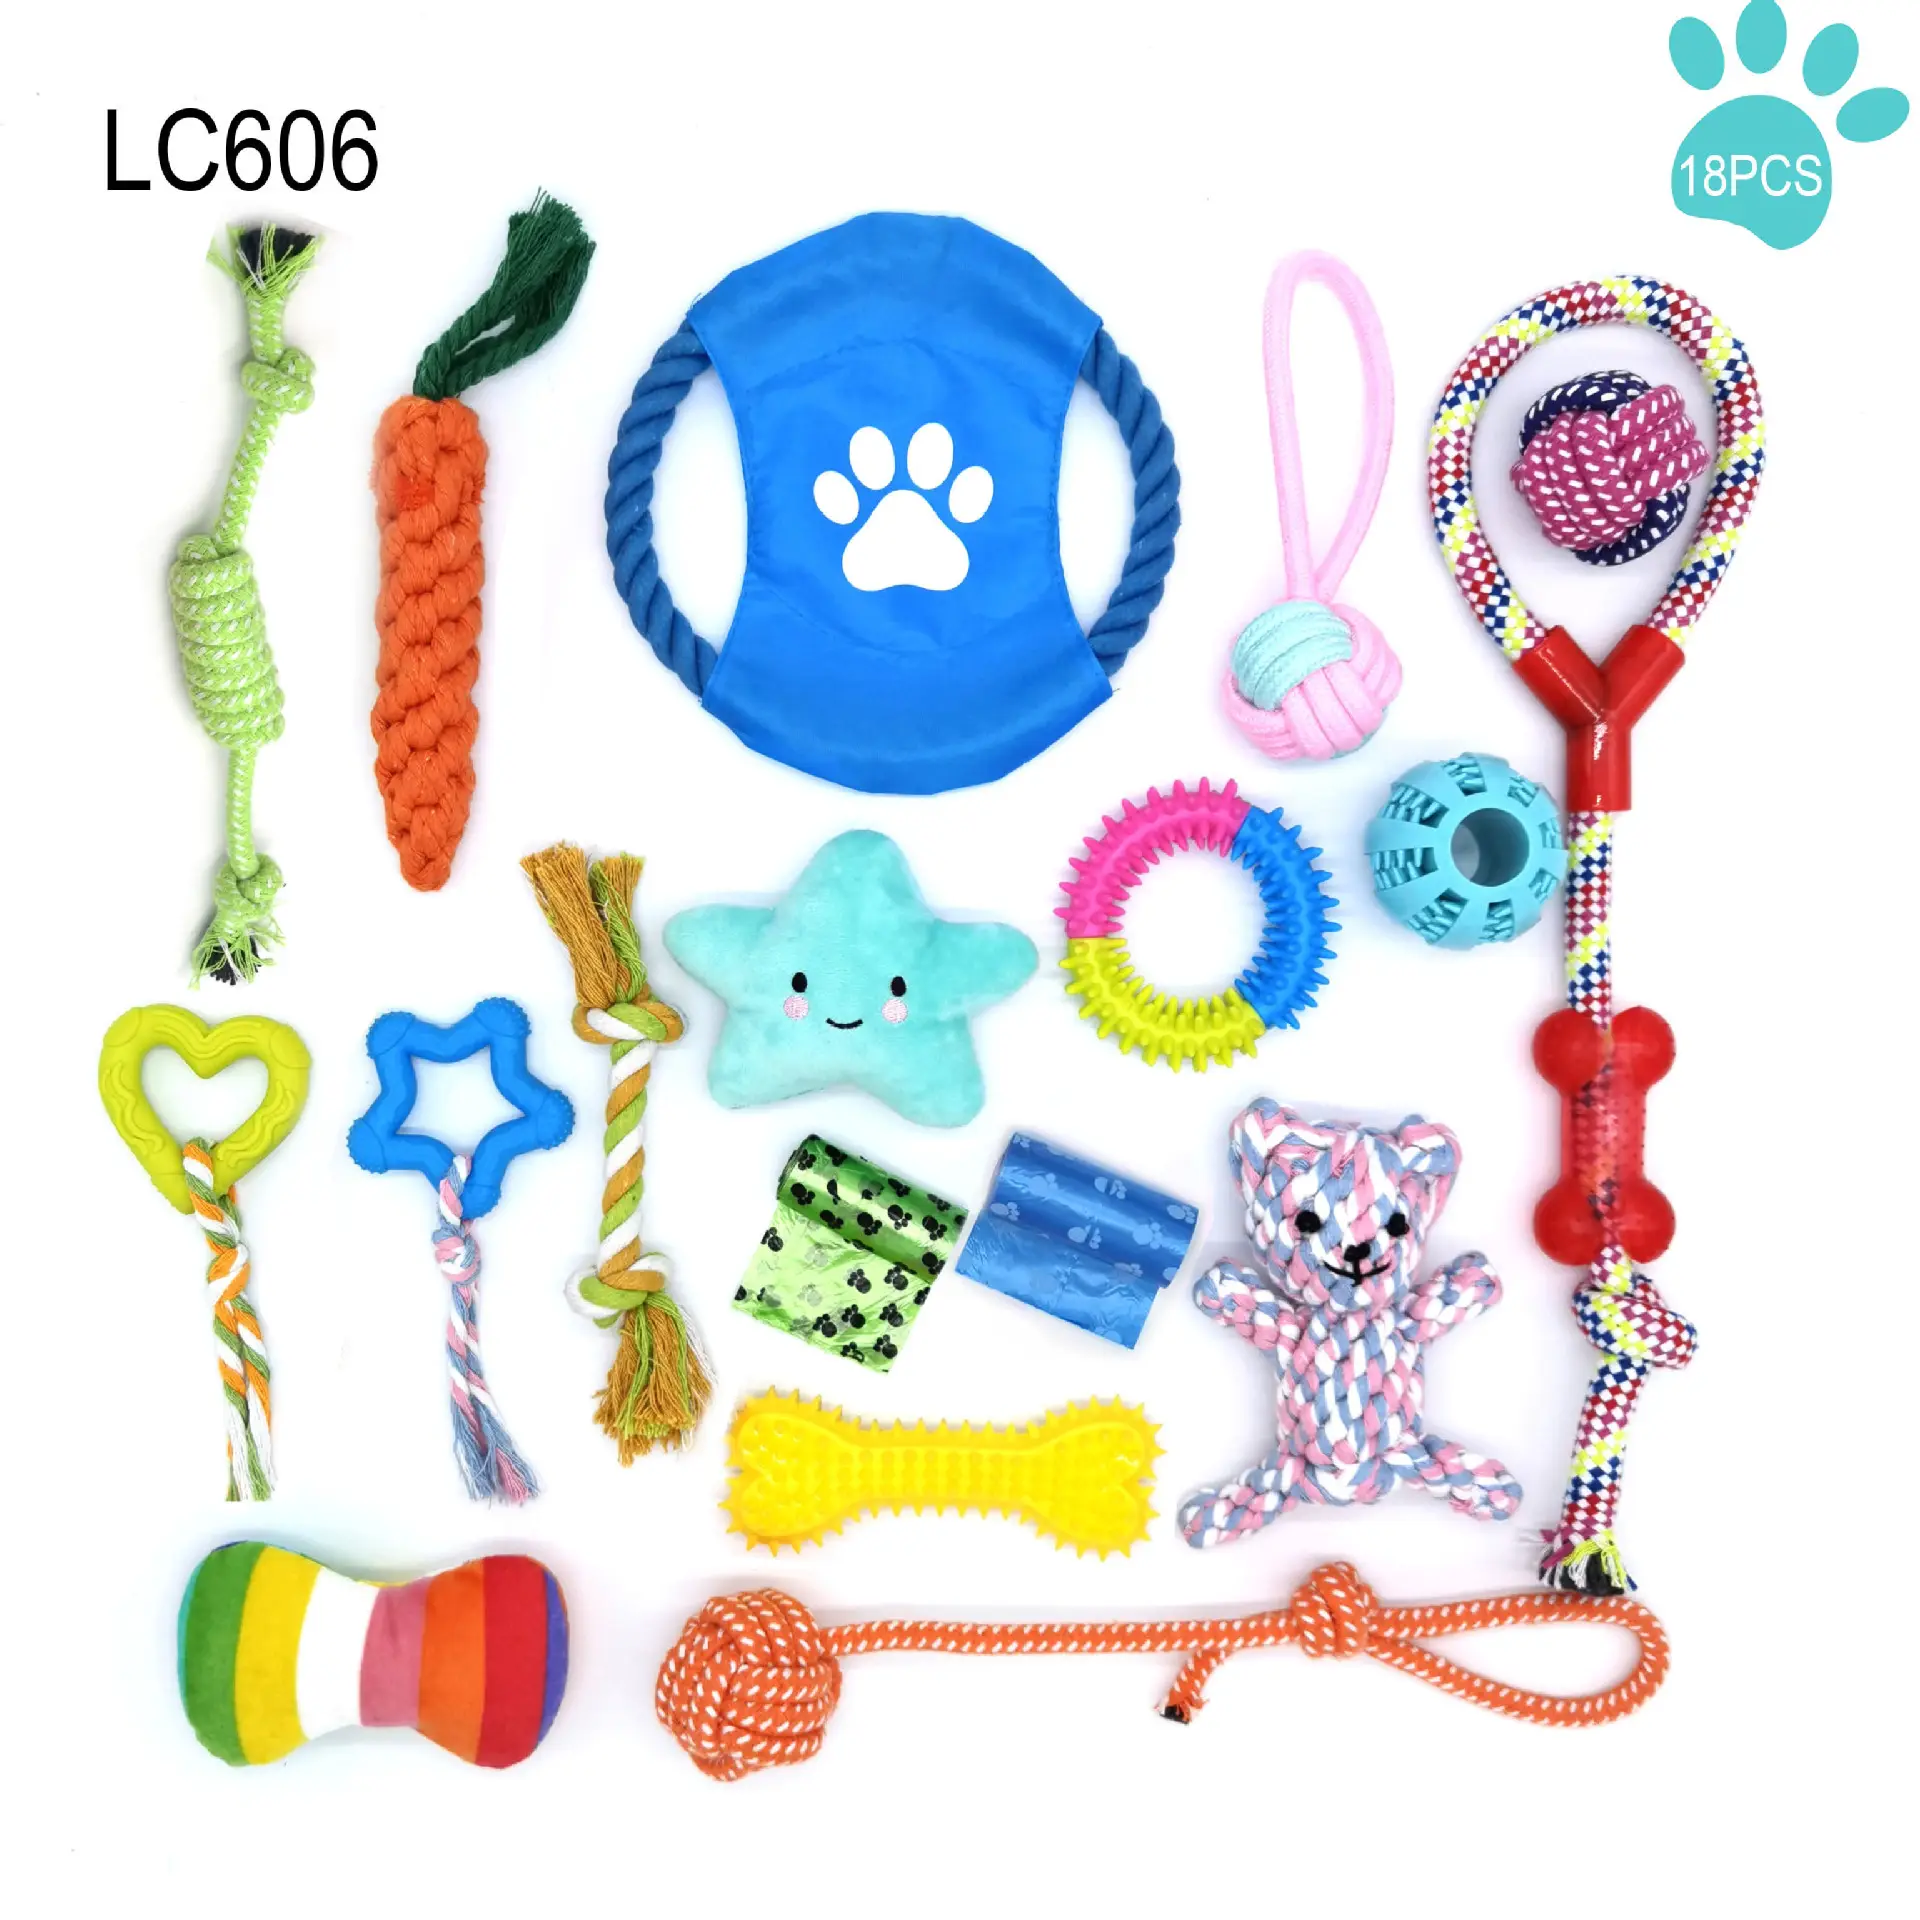 Qbellpet Hot Selling puzzle Interactive Dog Toy Set with Squeaky flying disk Bone Chewing Toy Tug Rope Made of Cotton Rope Plush